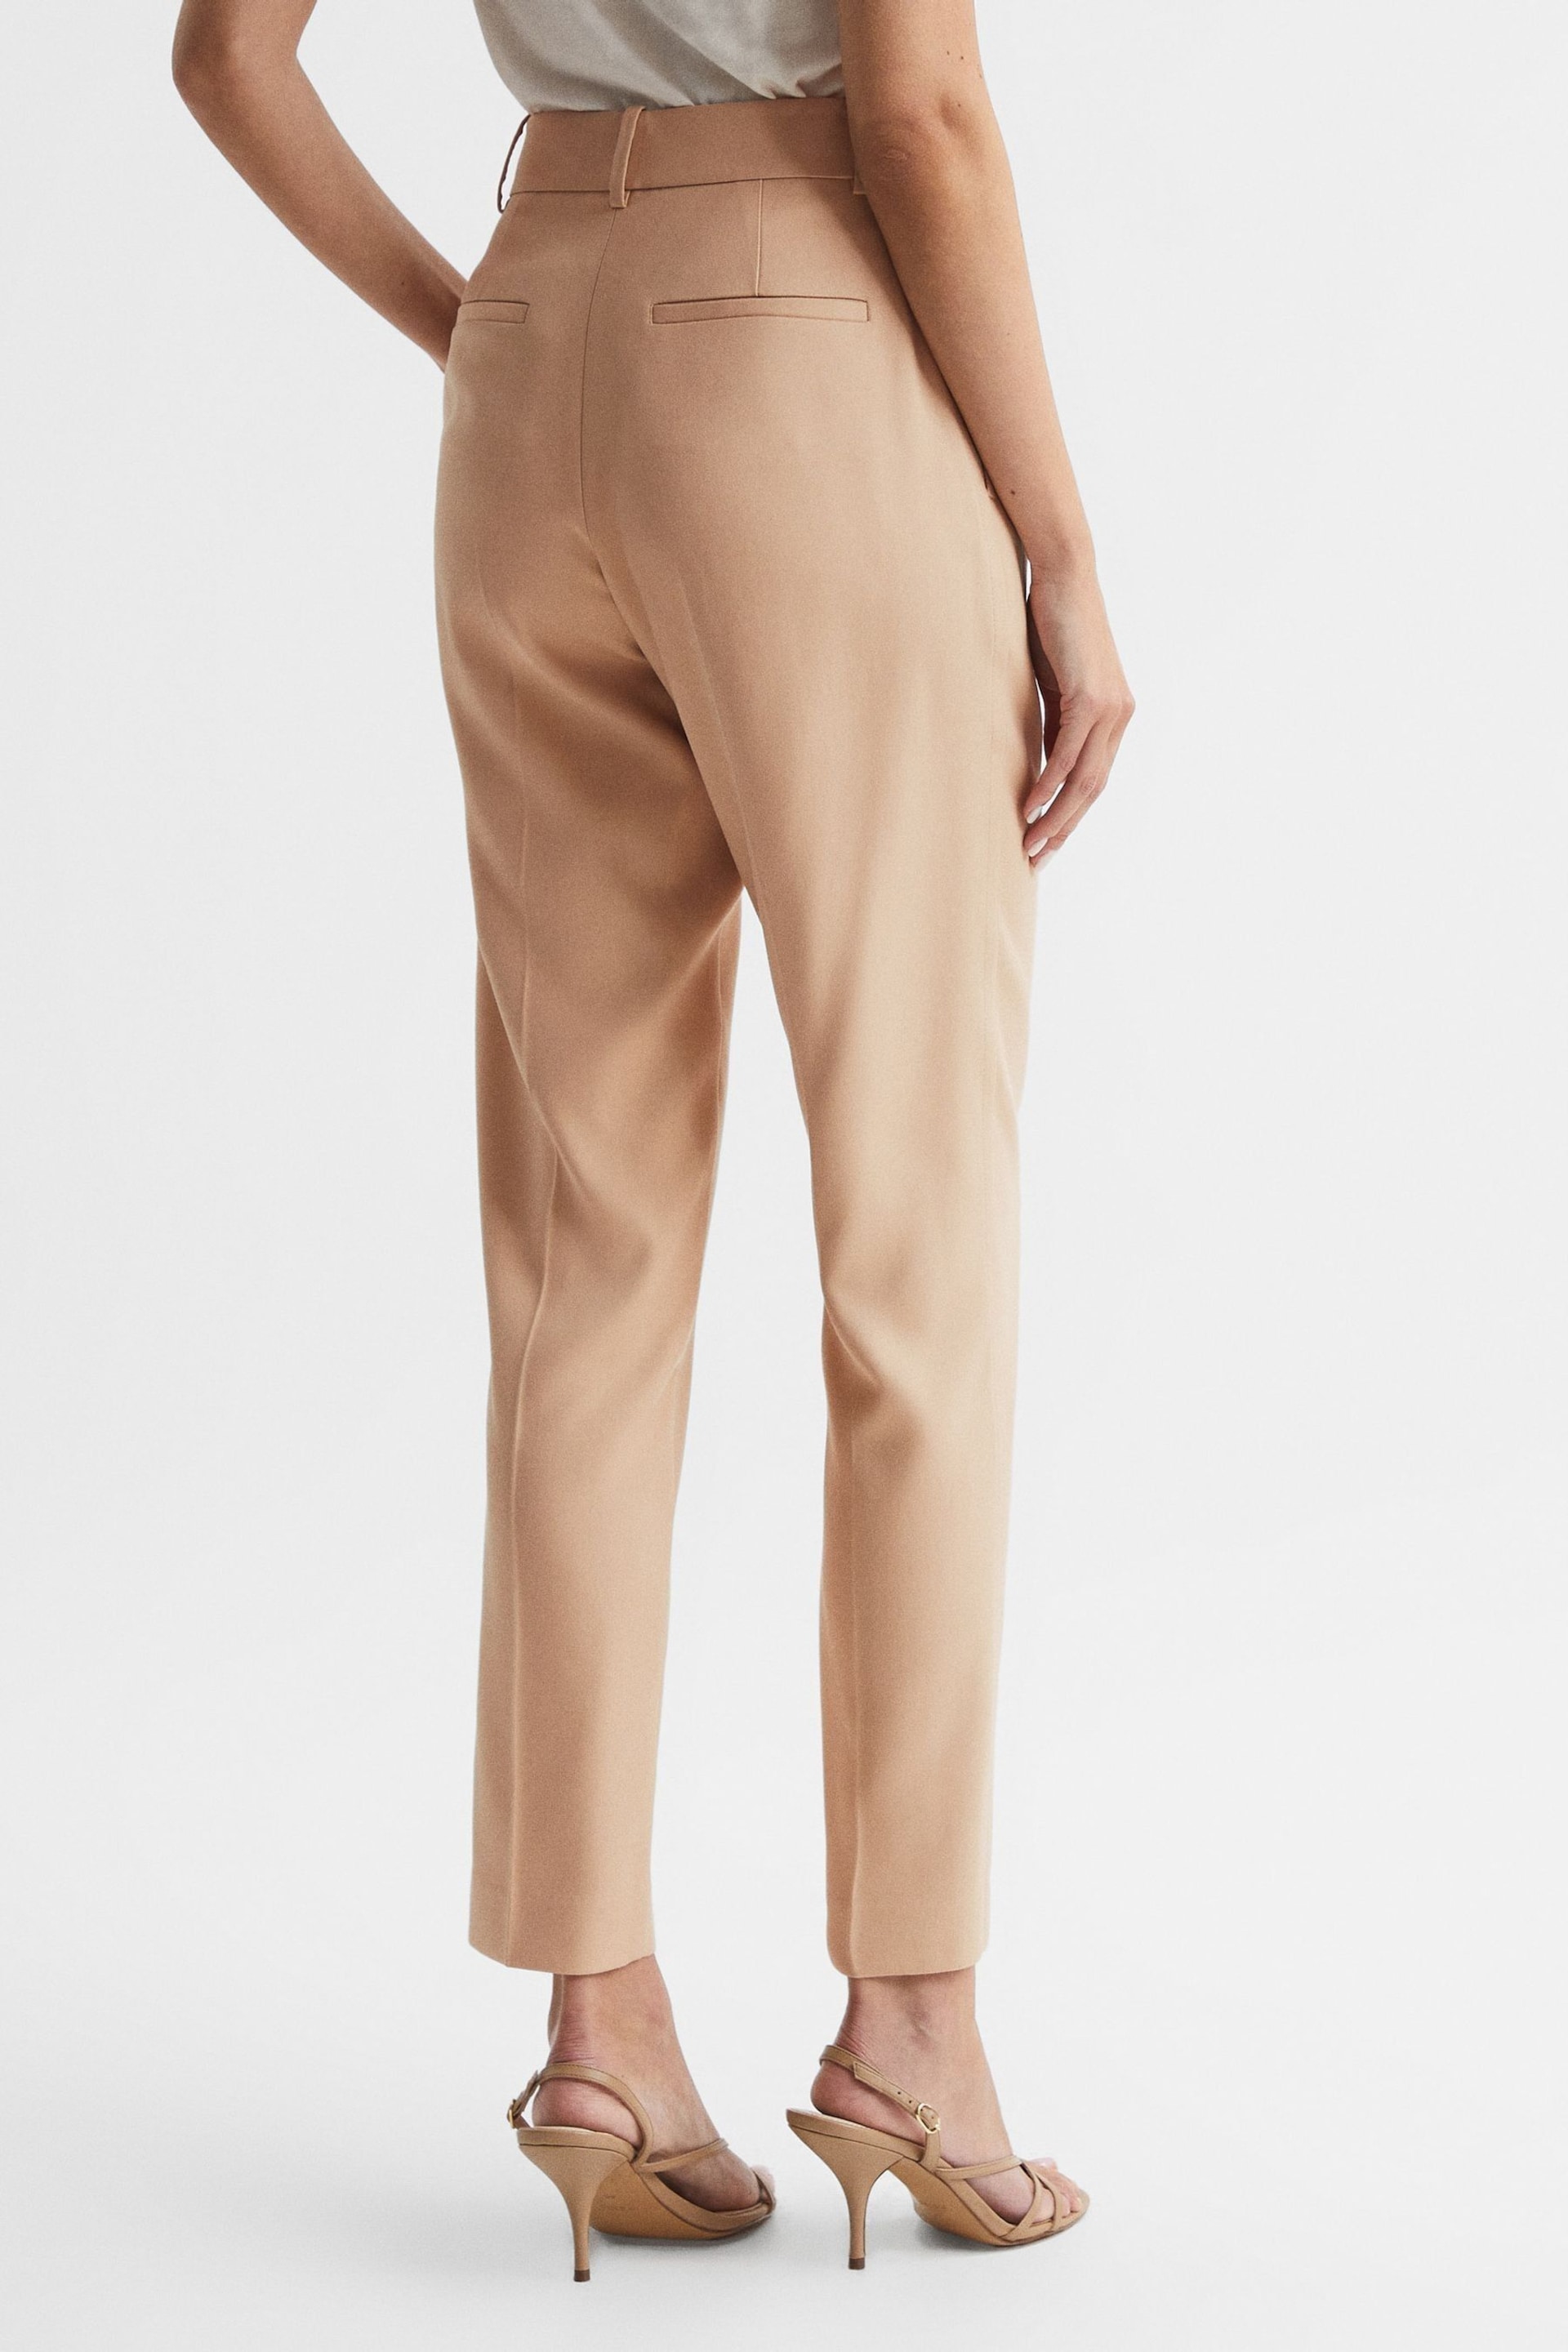 Reiss Camel Ember Slim Fit High Rise Trousers - Image 5 of 5